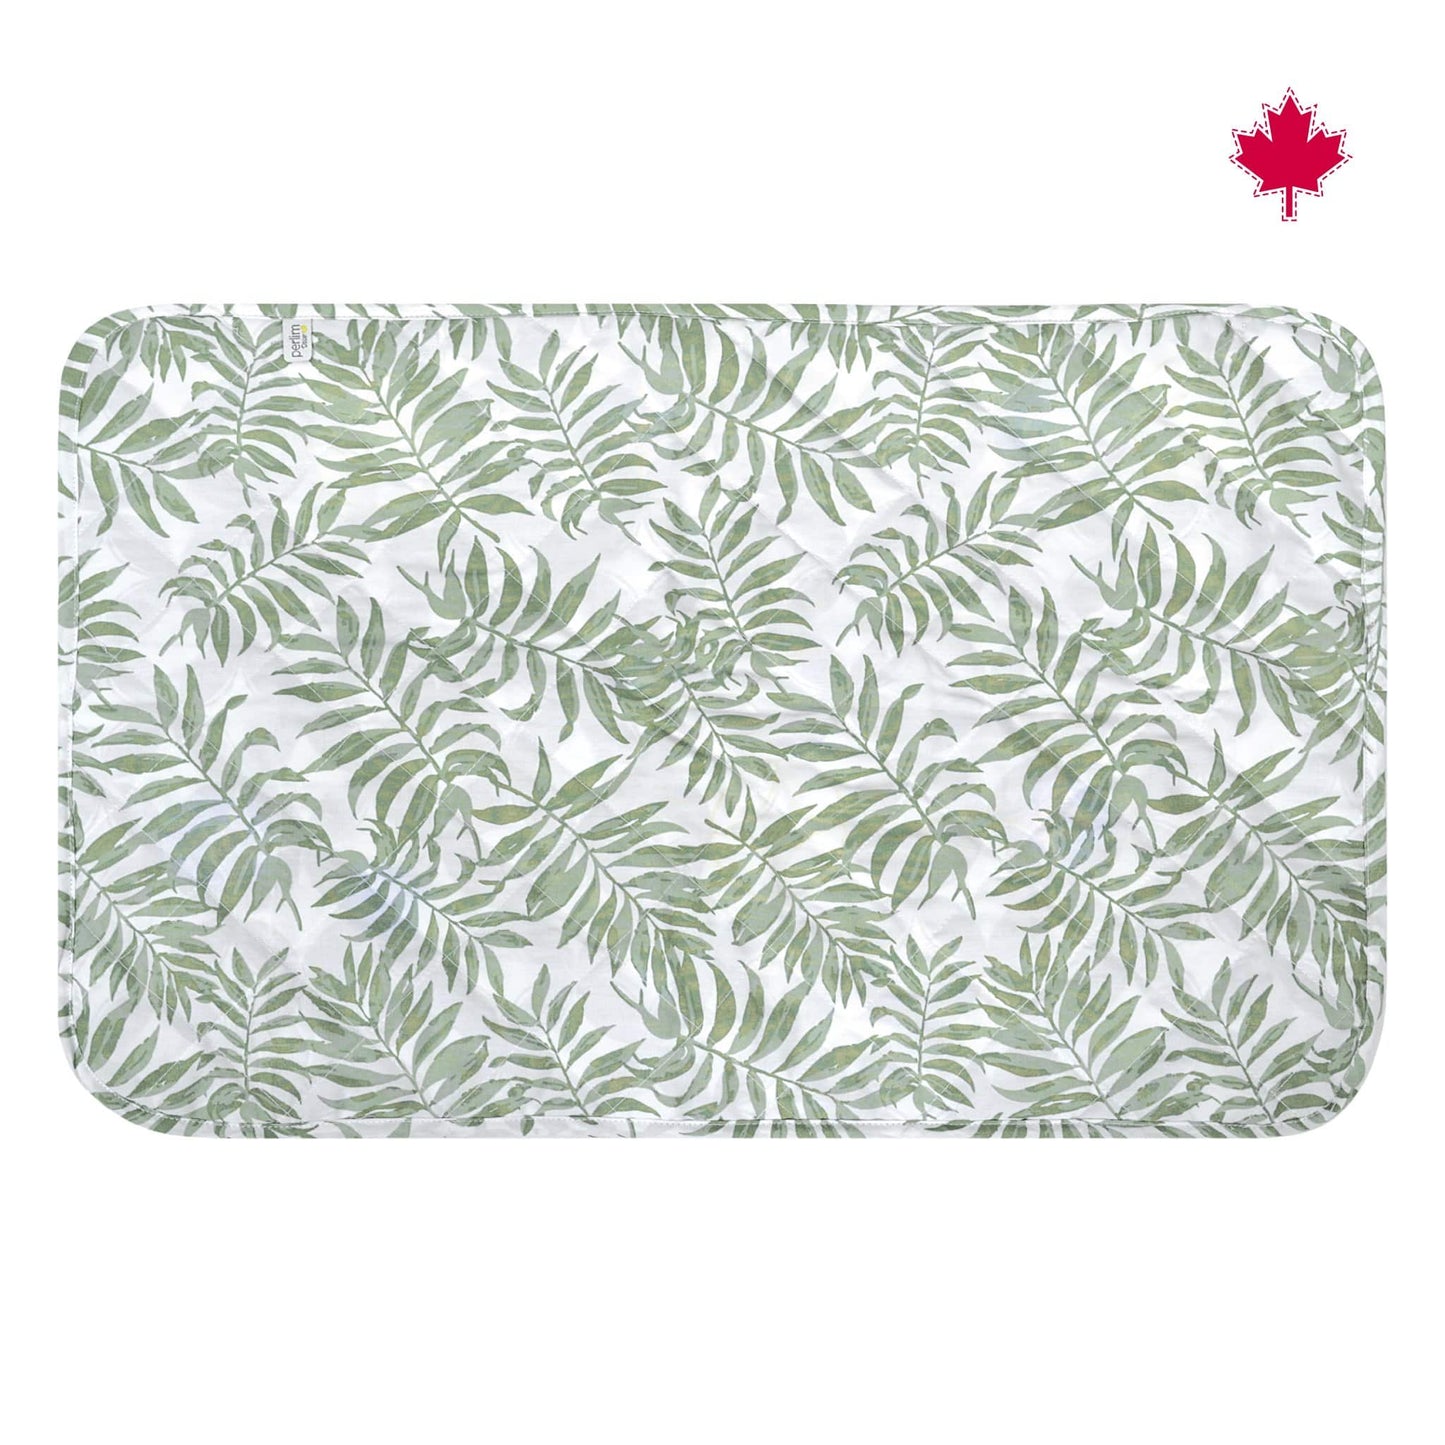 Waterproof Change Pad - Tropical Green (27x40 inches)